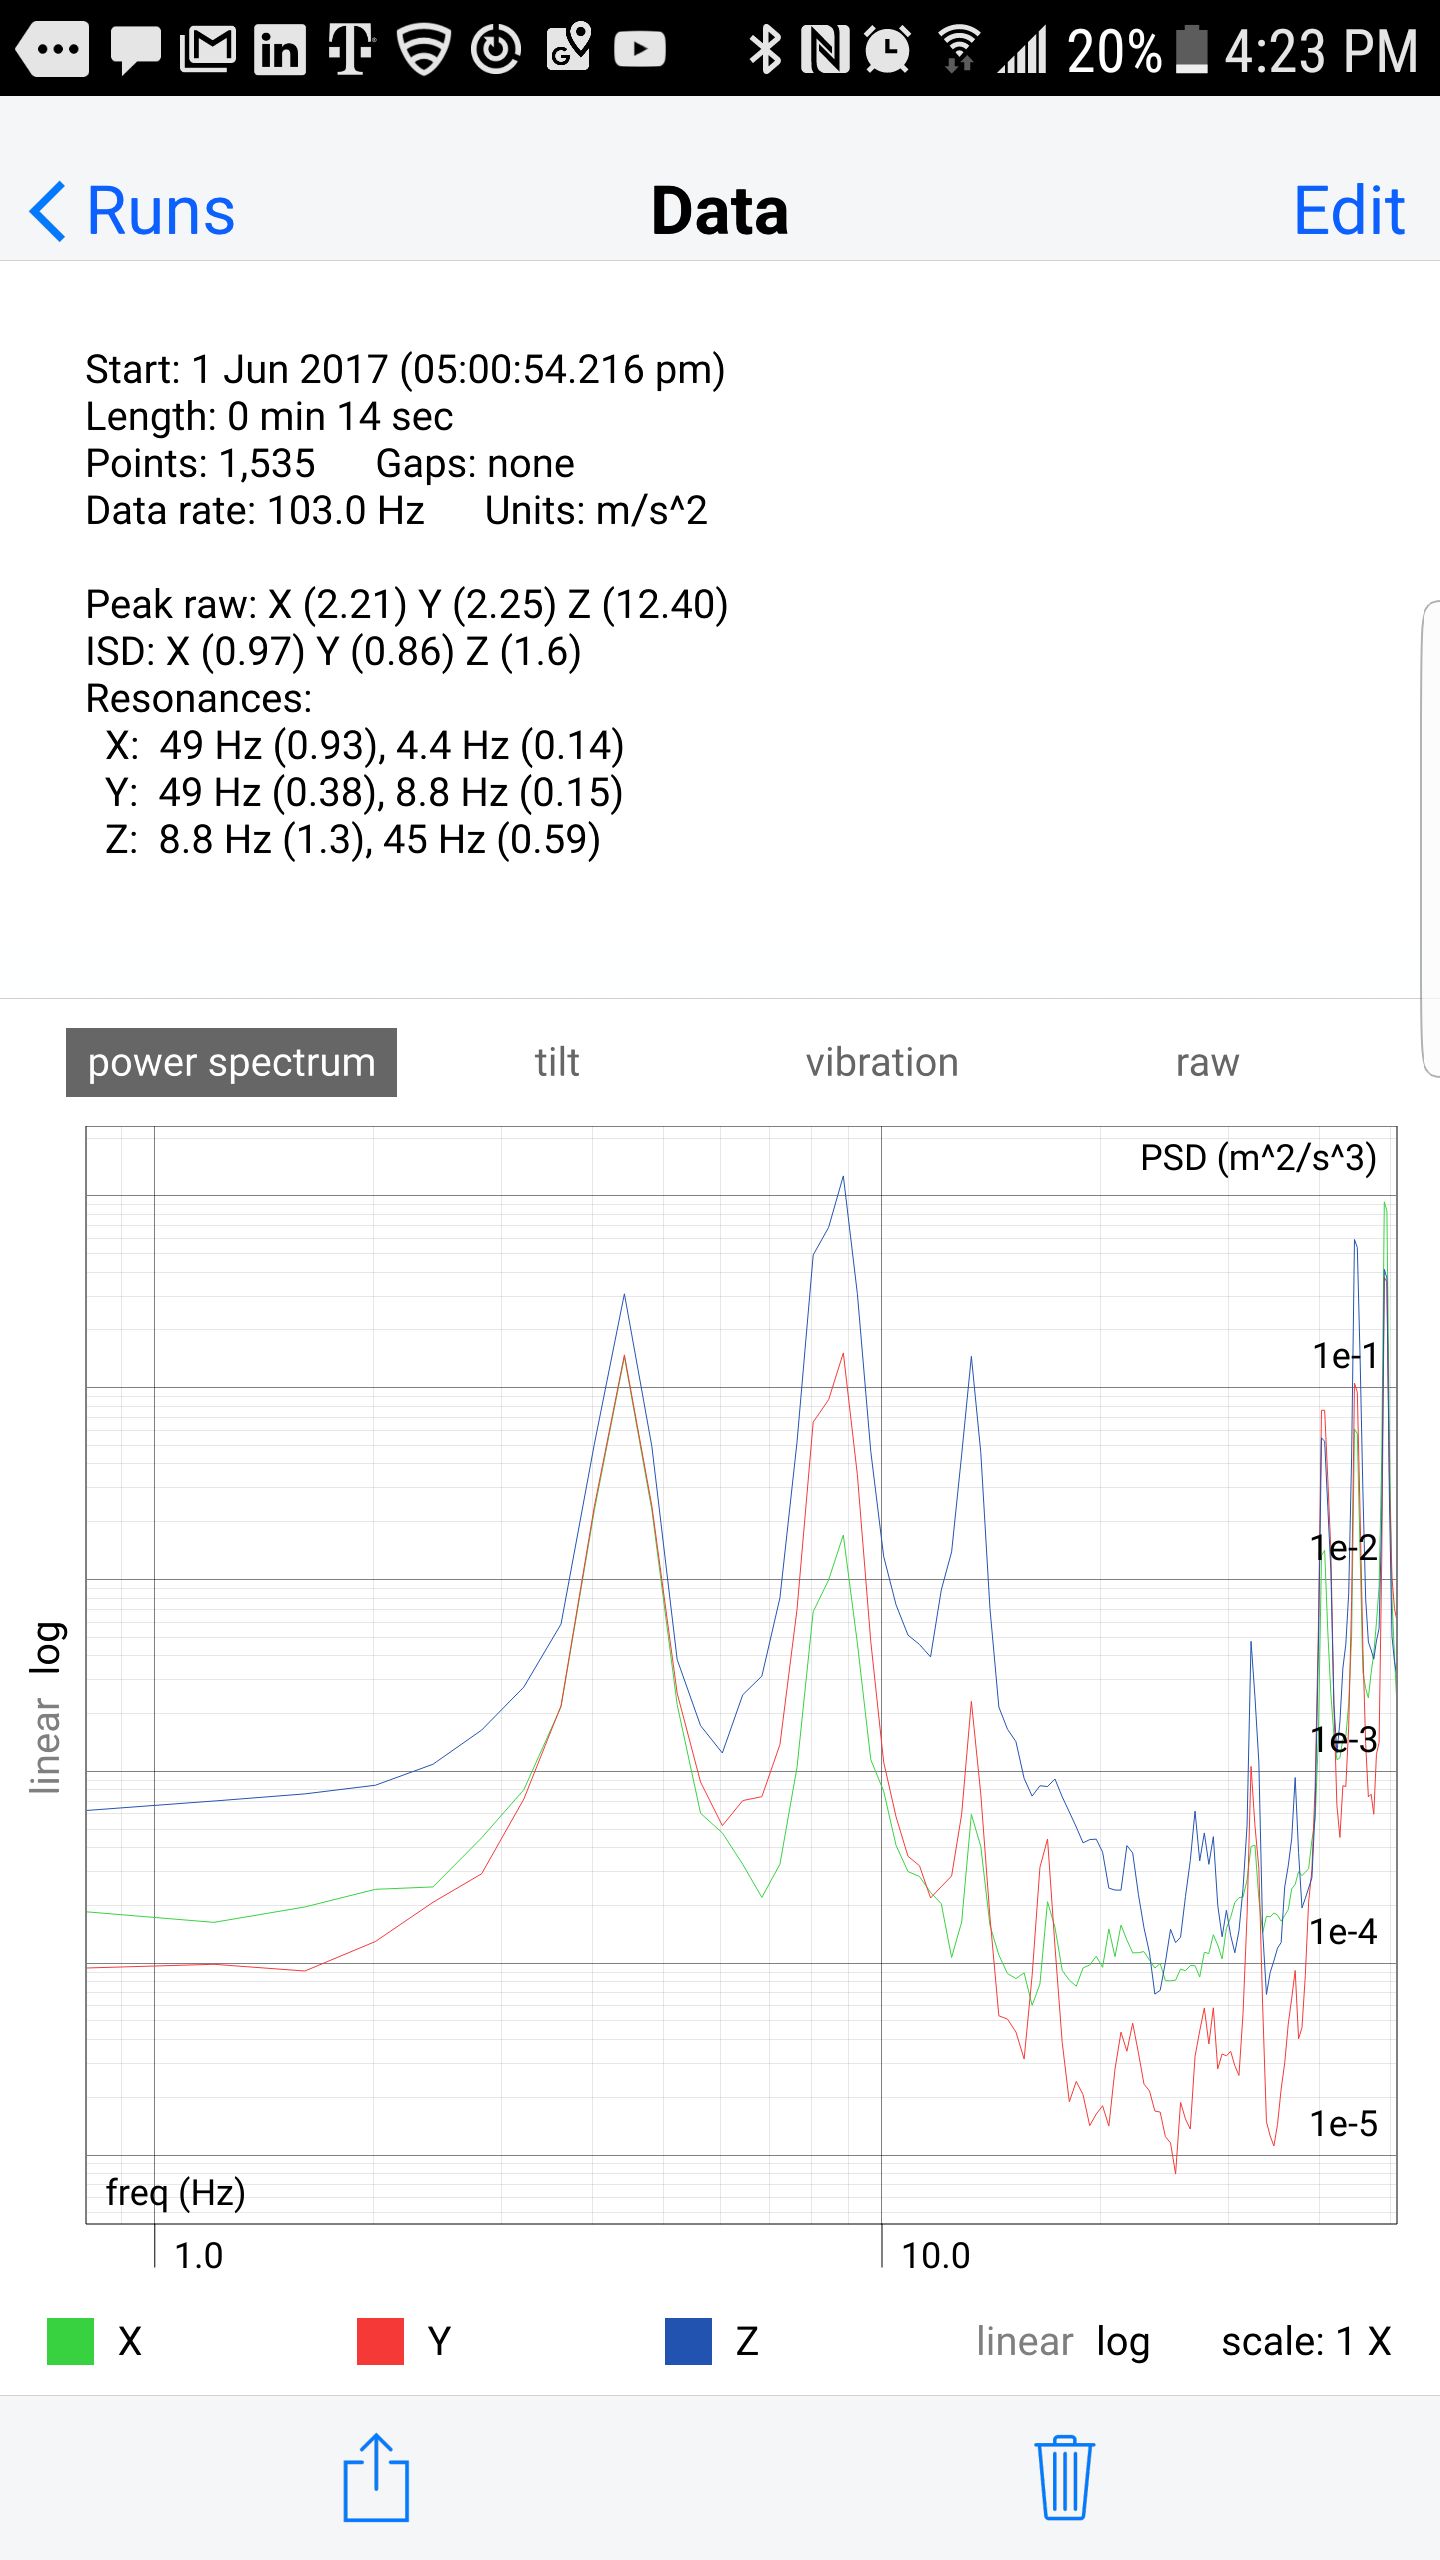  Measured Vibration Power Spectrum for Quantifying Effectiveness of Vibe Reducing Pad 